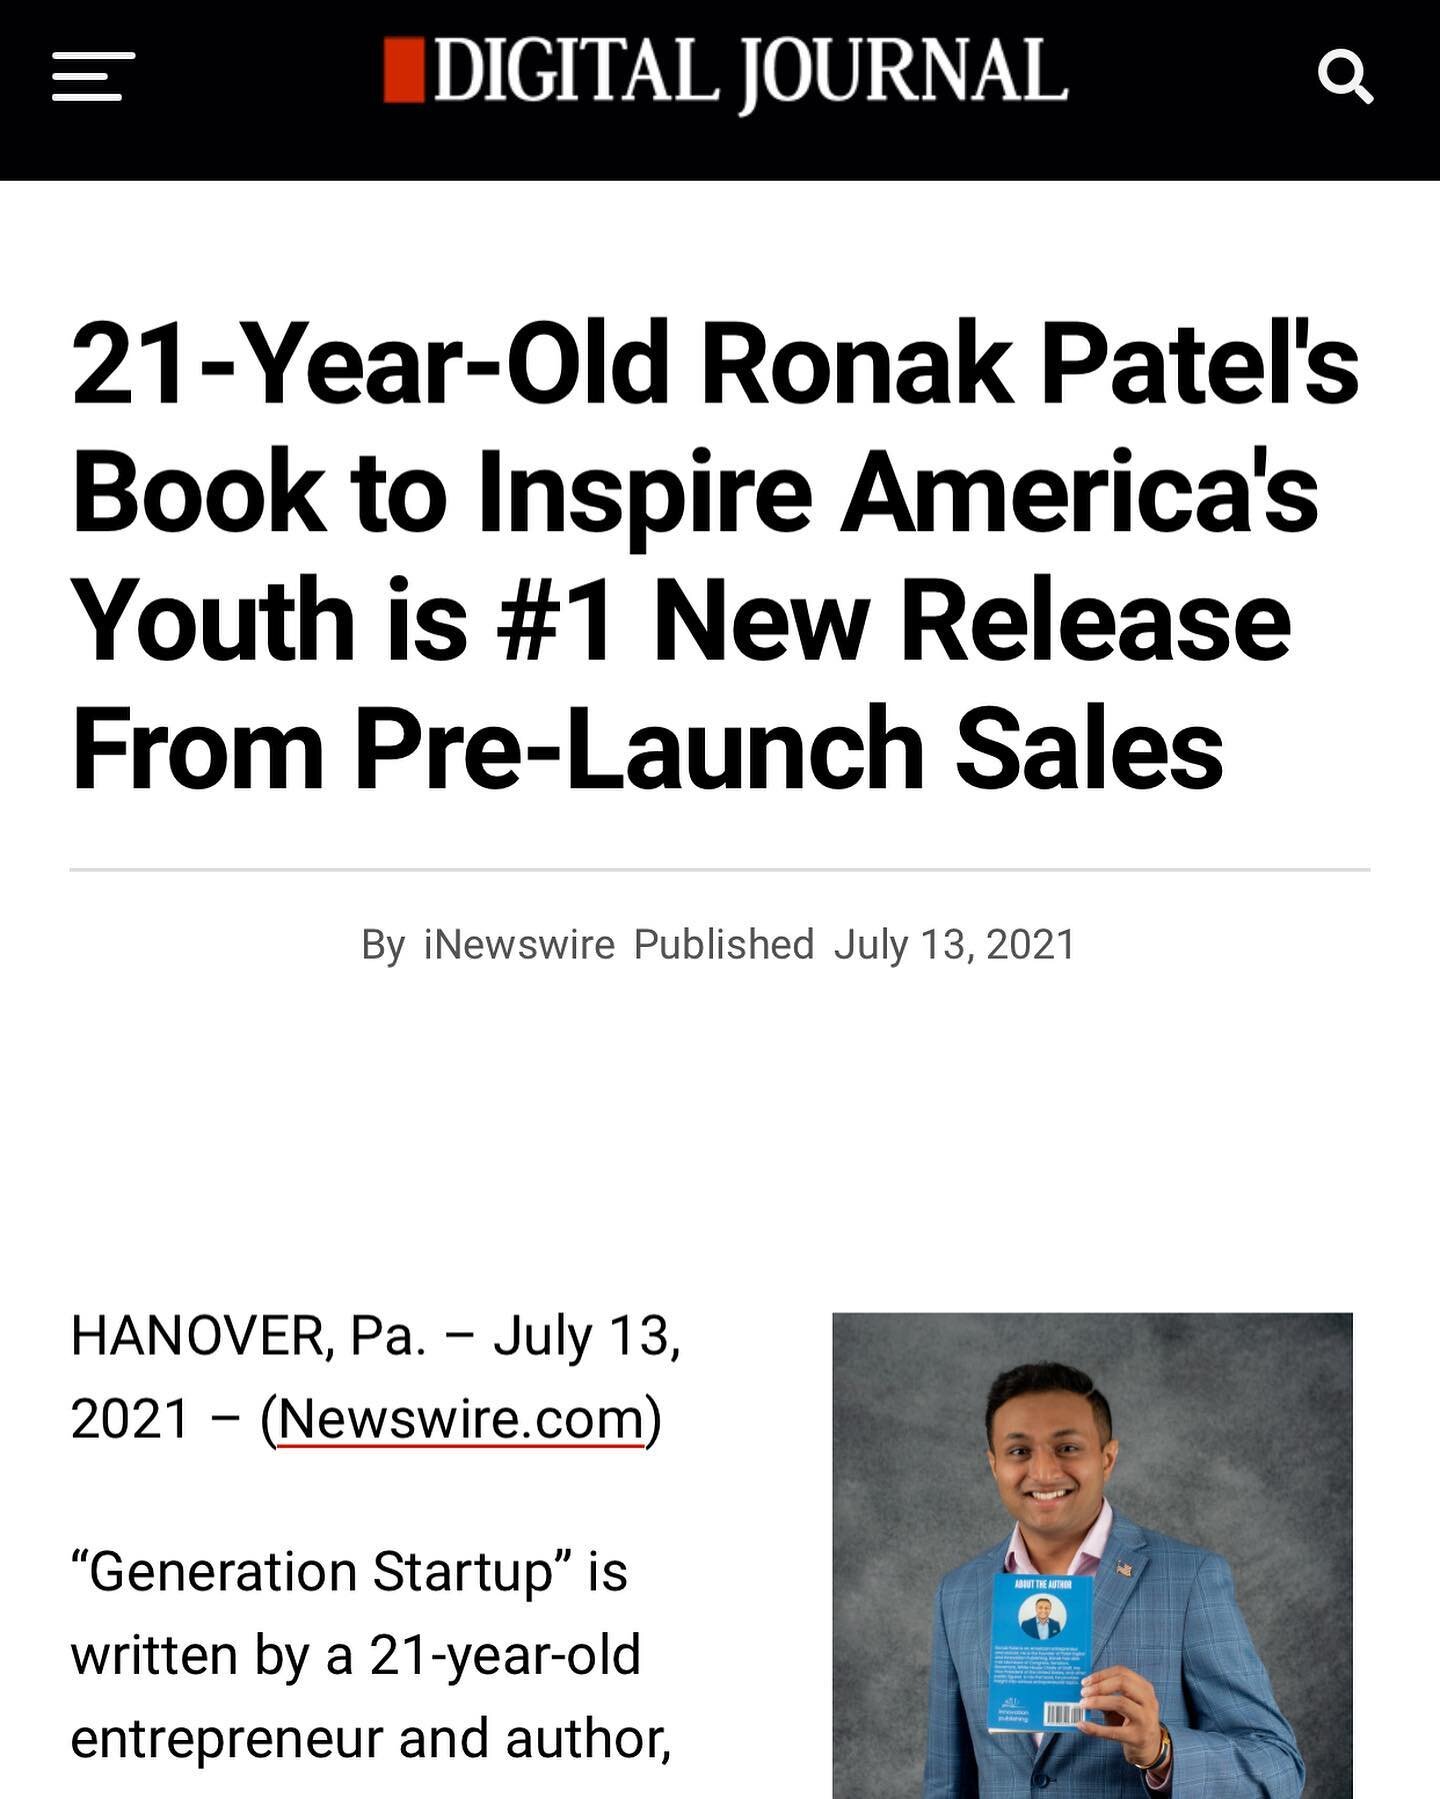 Unreal! THANK YOU to everyone who helped throughout the process of publishing this book and everyone who already placed an order. Paperback and kindle versions are both available on Amazon.com. (Link in my bio) 🙏

Special thanks to @manwith2names an